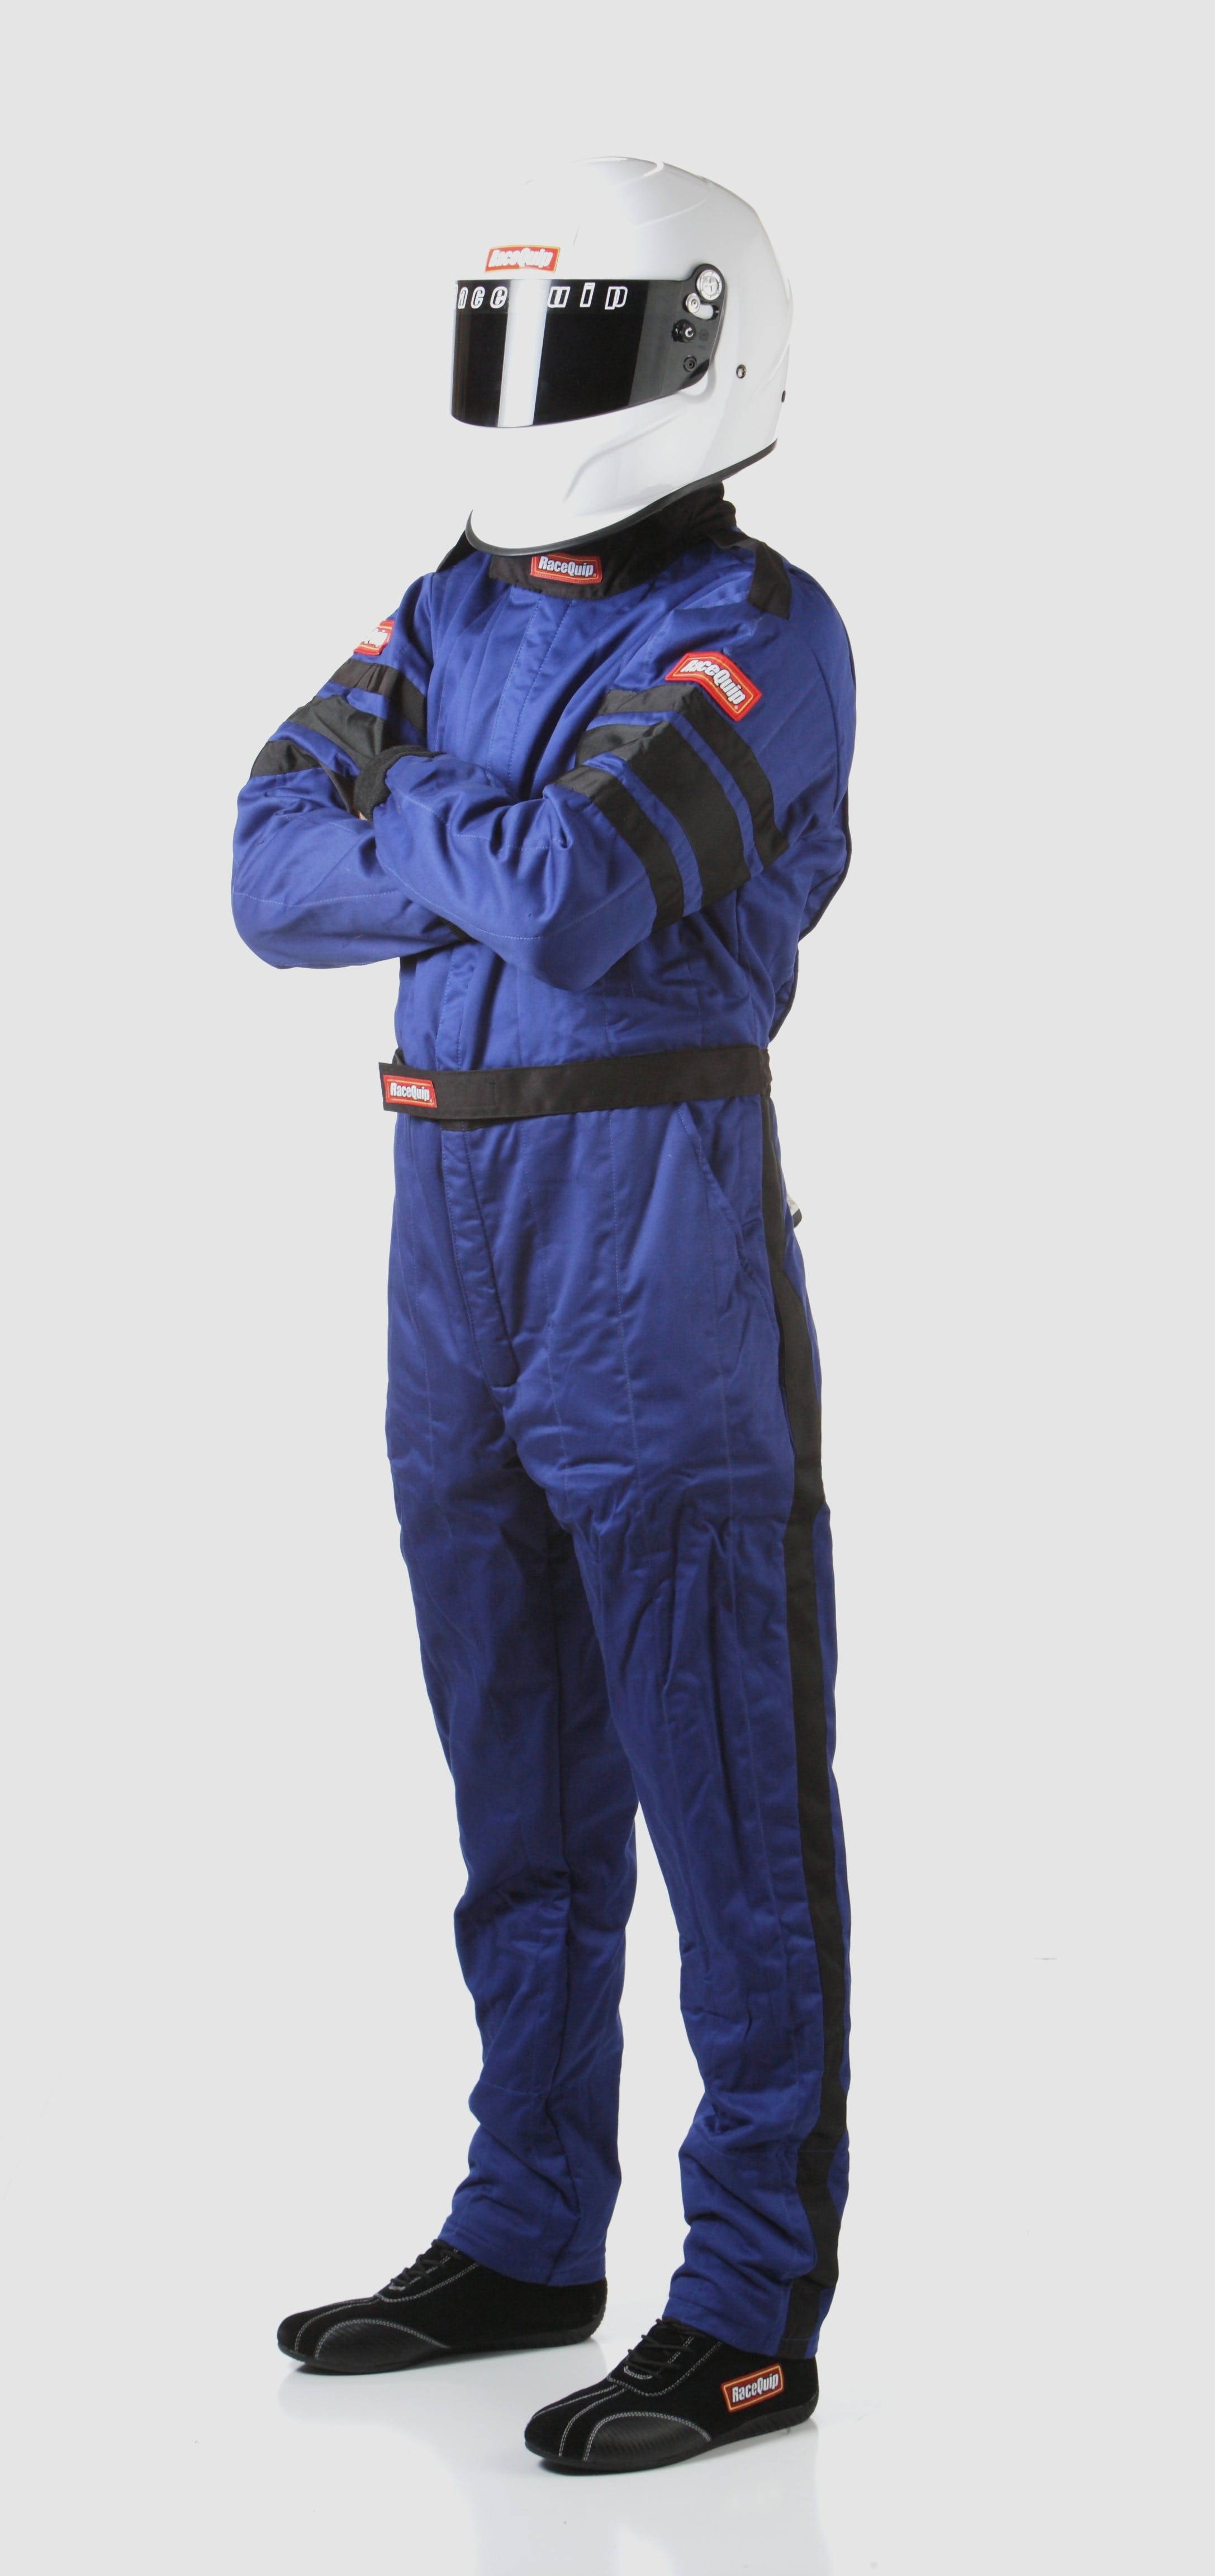 RaceQuip 120027 SFI-5 Pyrovatex One-Piece Multi-Layer Racing Fire Suit (Blue, XX-Large)